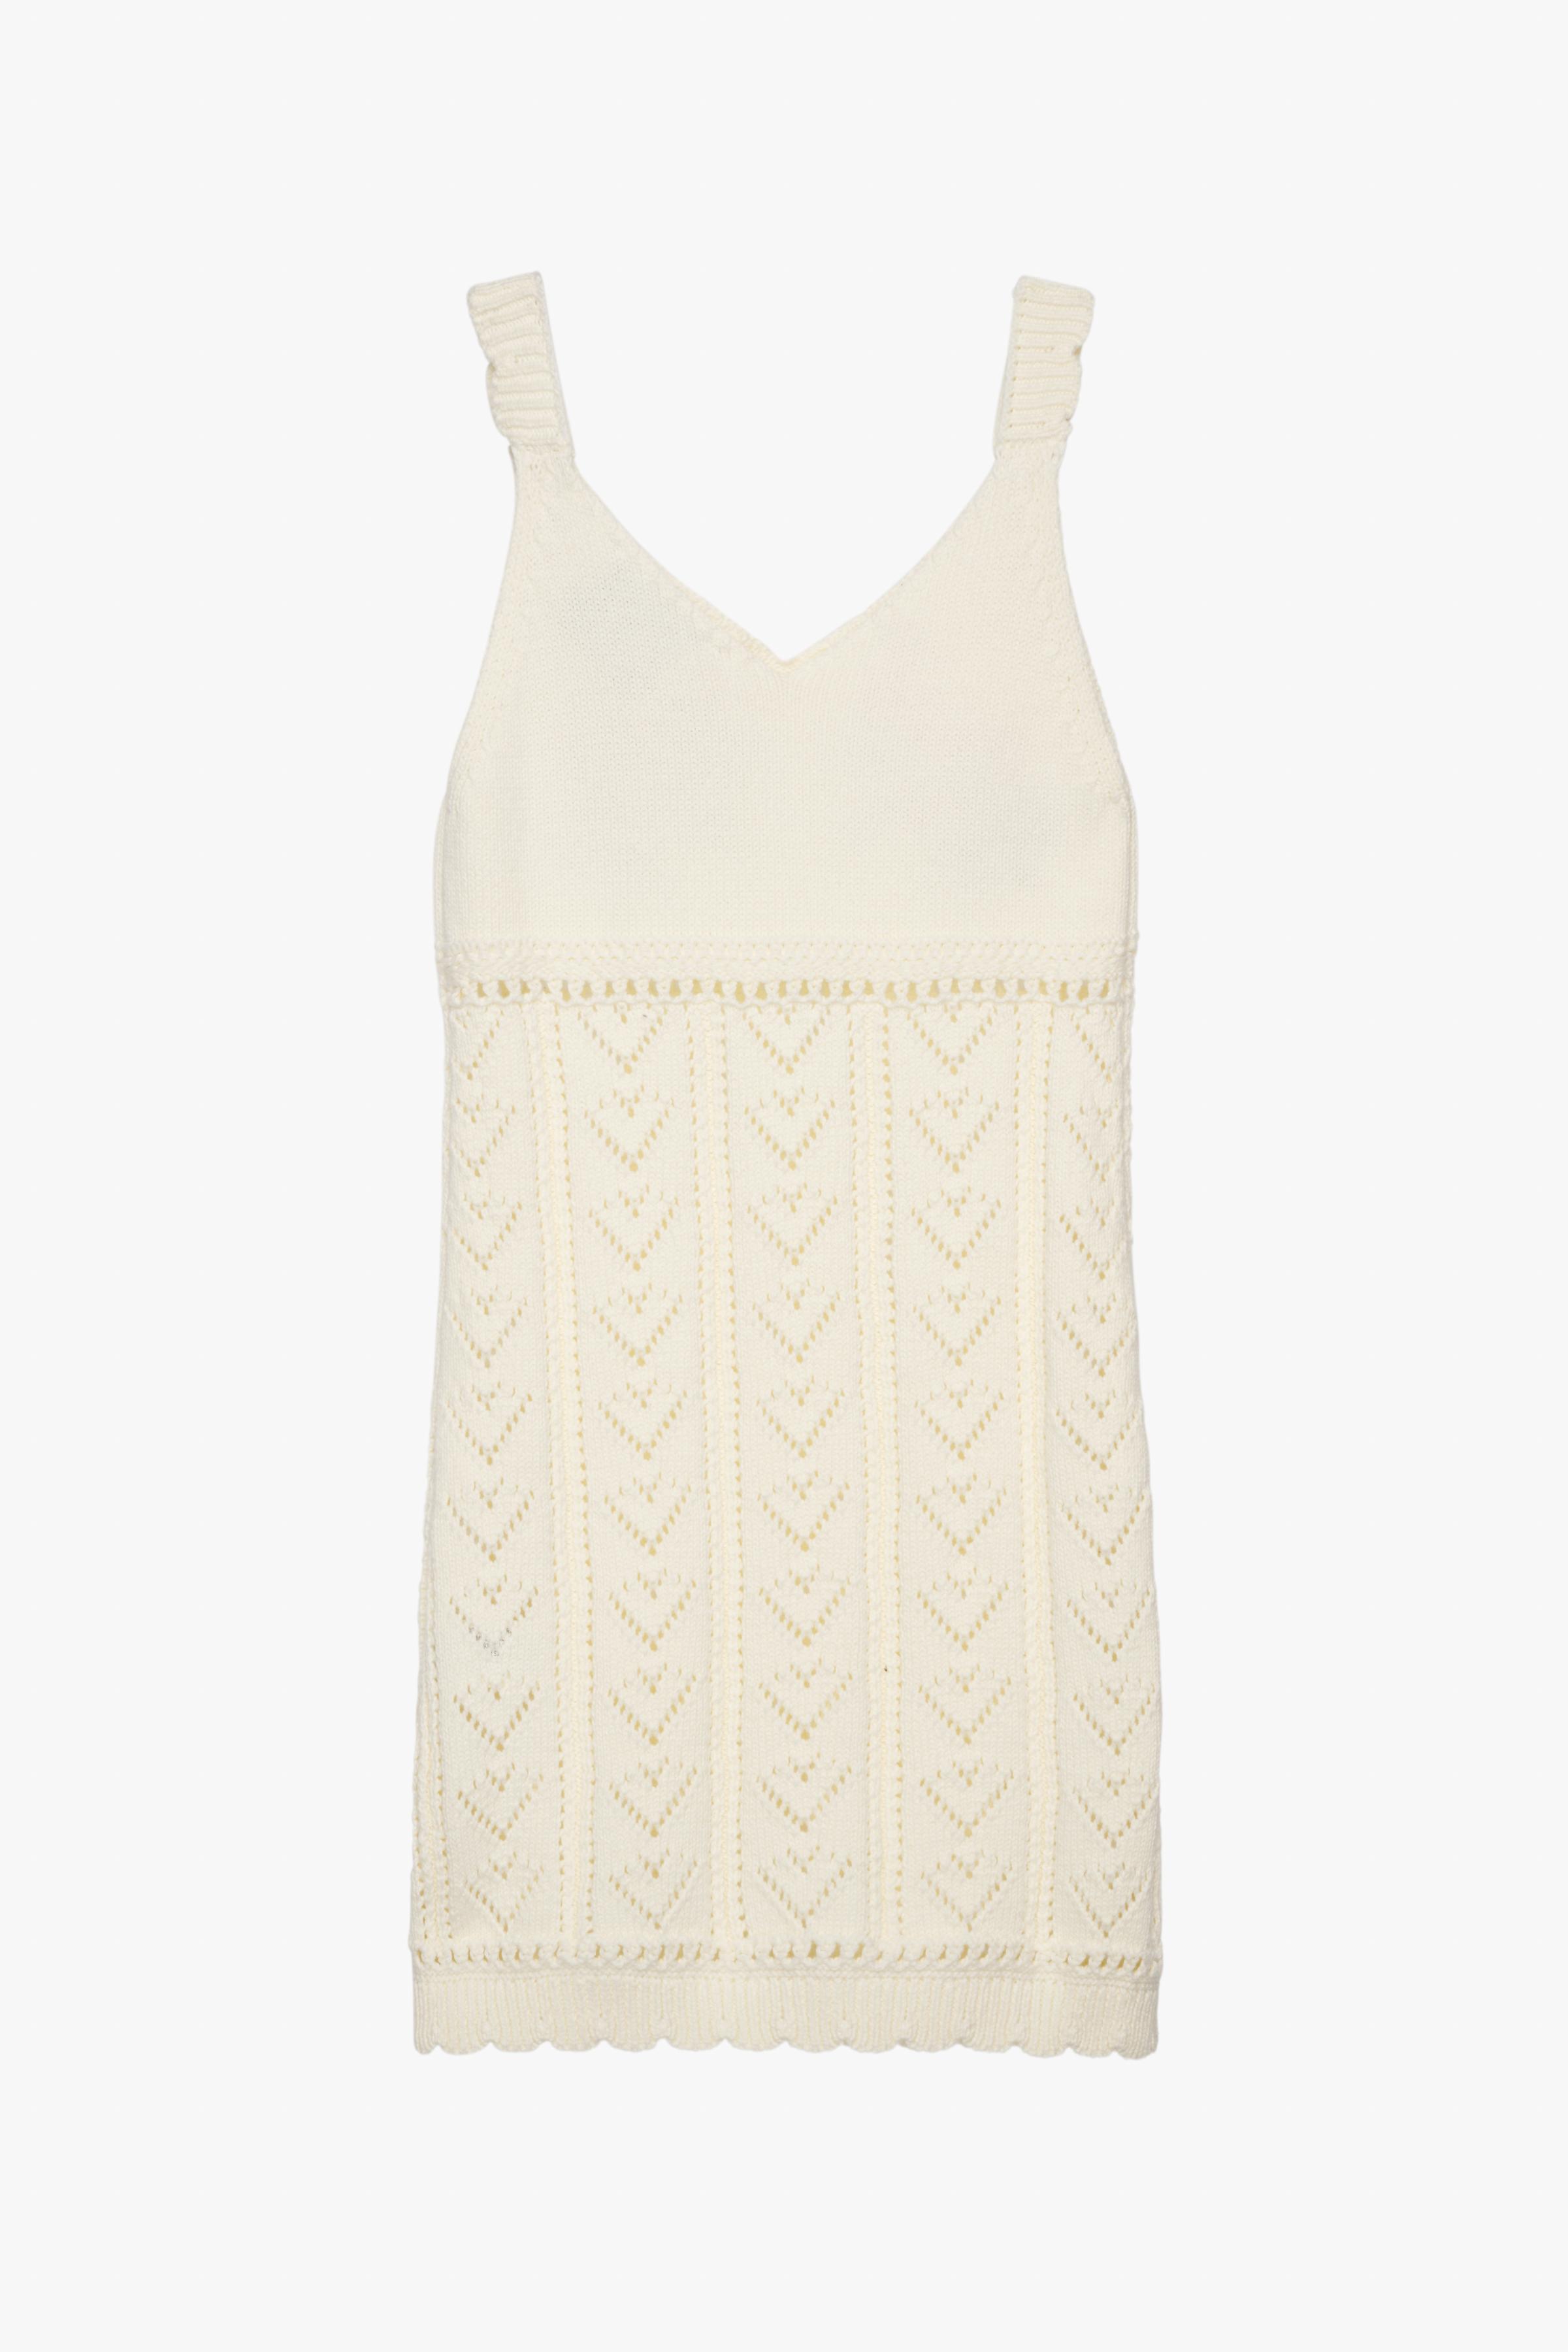 KNIT DRESS WITH FLORAL EMBROIDERY - LIMITED EDITION 